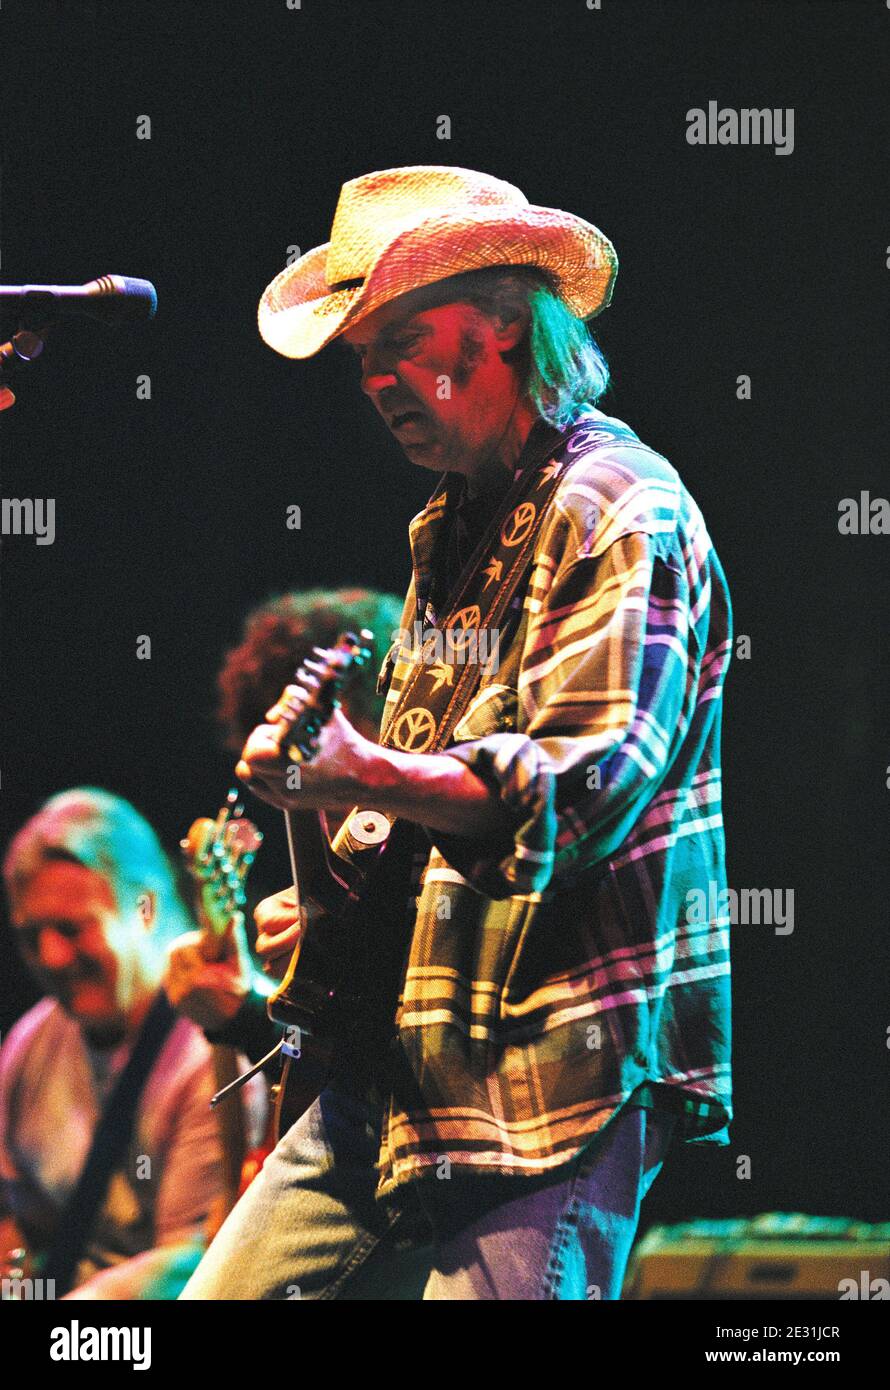 Neil Young and Crazy Horse in concert at the Birmingham NEC Arena, Birmingham, UK. 15th June 2001 Stock Photo